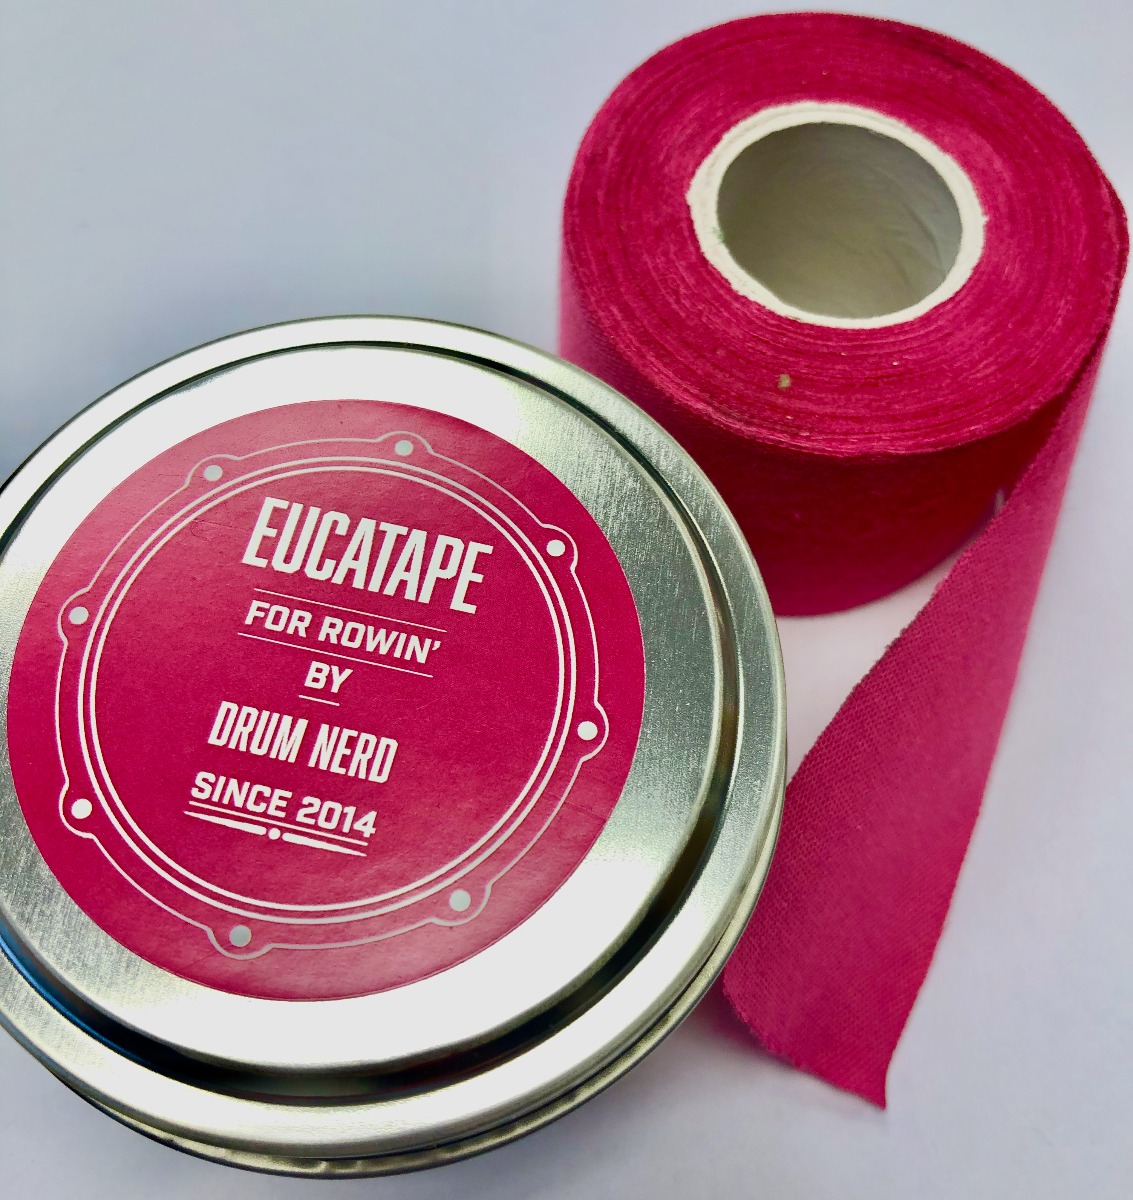 Eucatape for Rowing - Pink